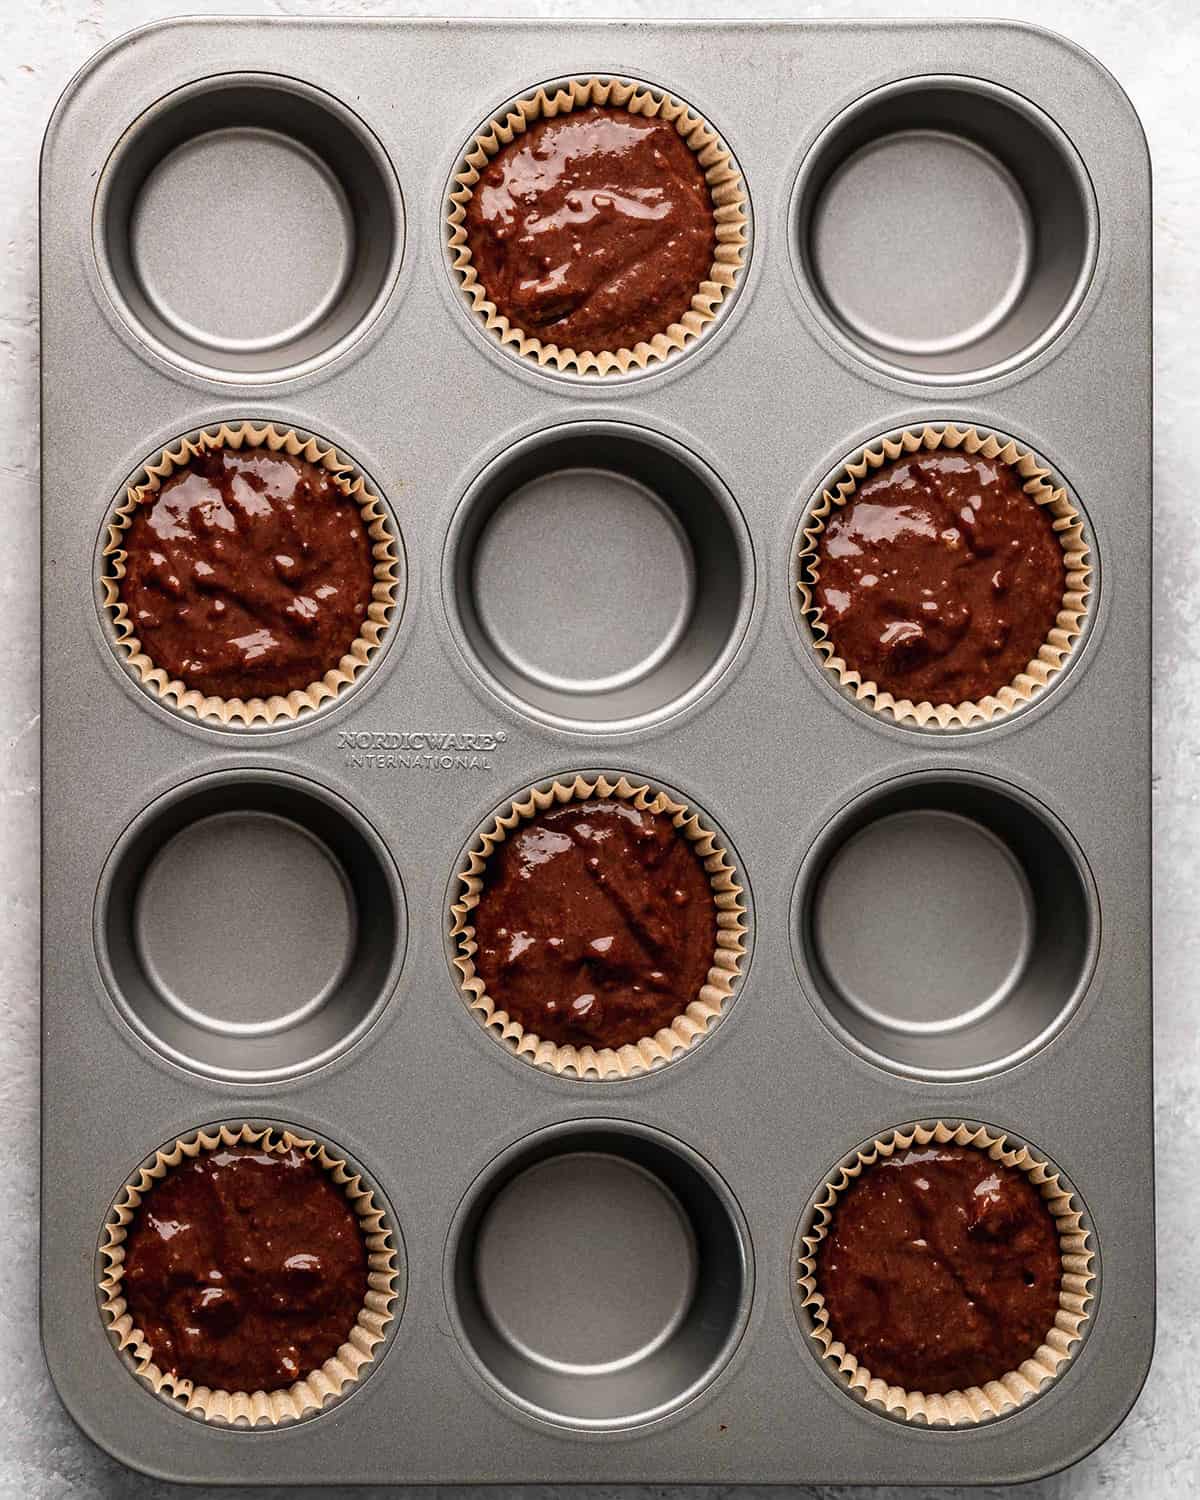 6 chocolate muffins in a muffin tin before baking